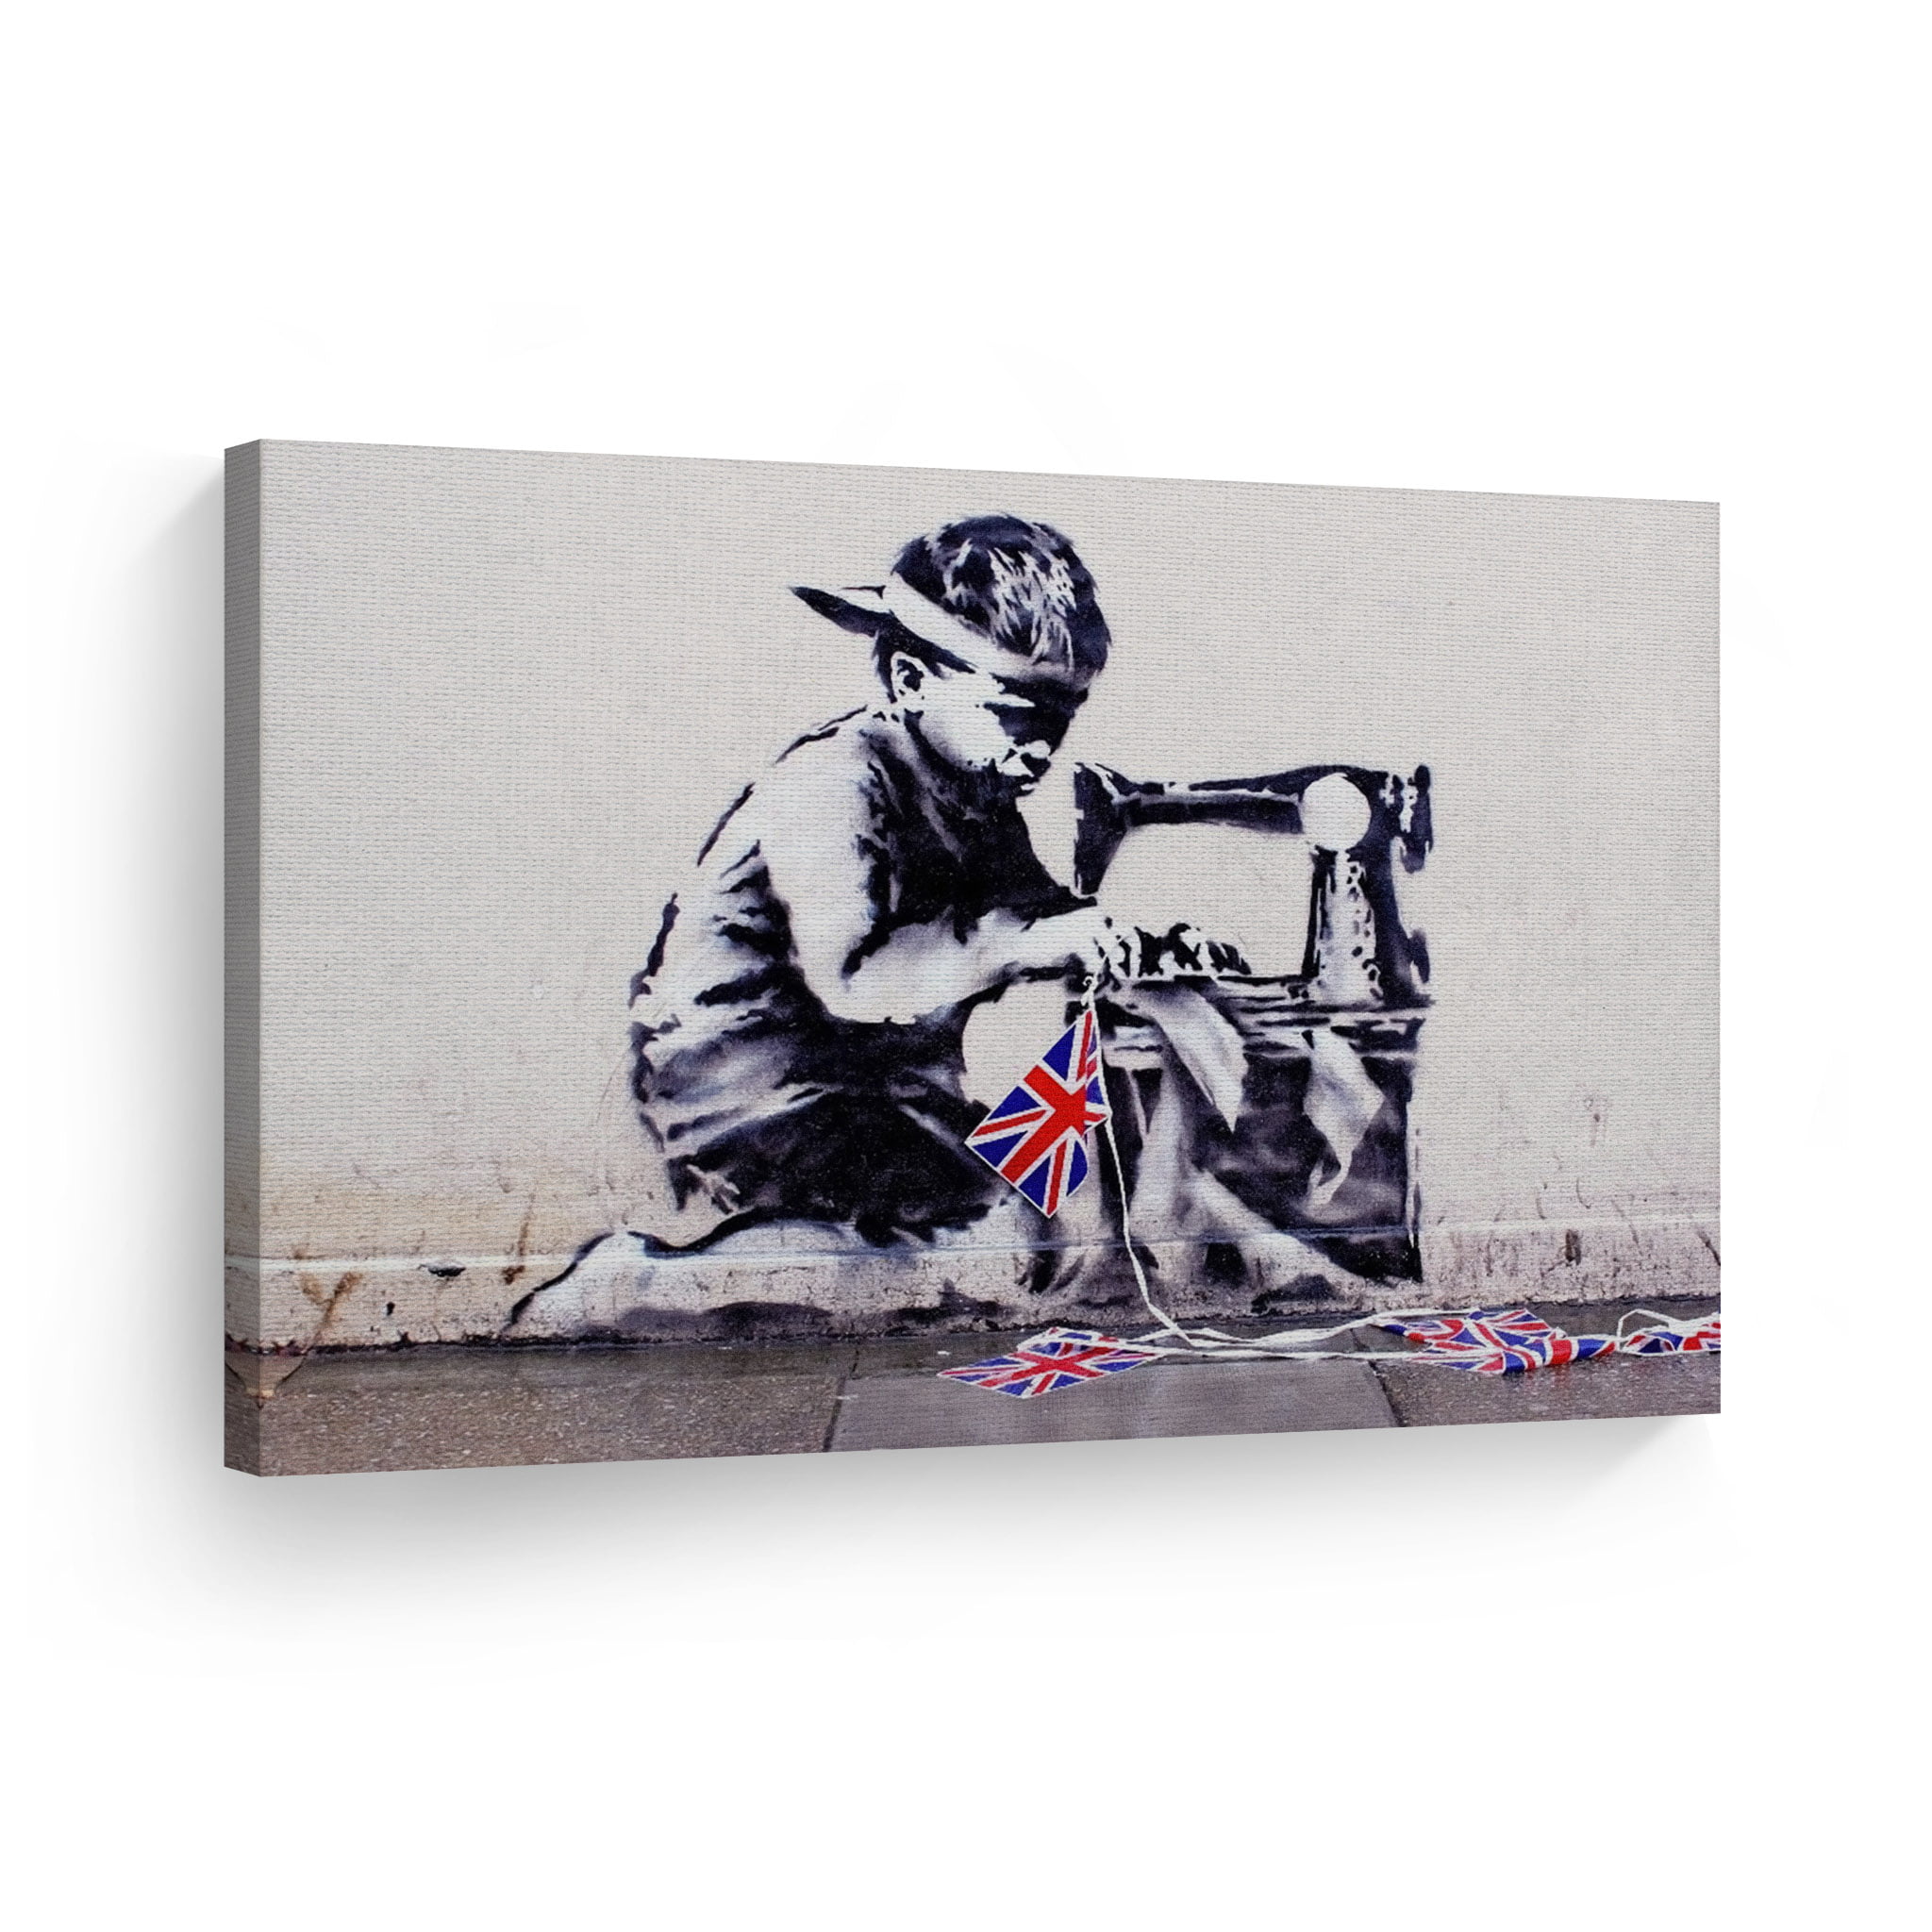 Child Labour Artwork By Banksy Reprint On Framed Canvas Wall Art Home Decoration 